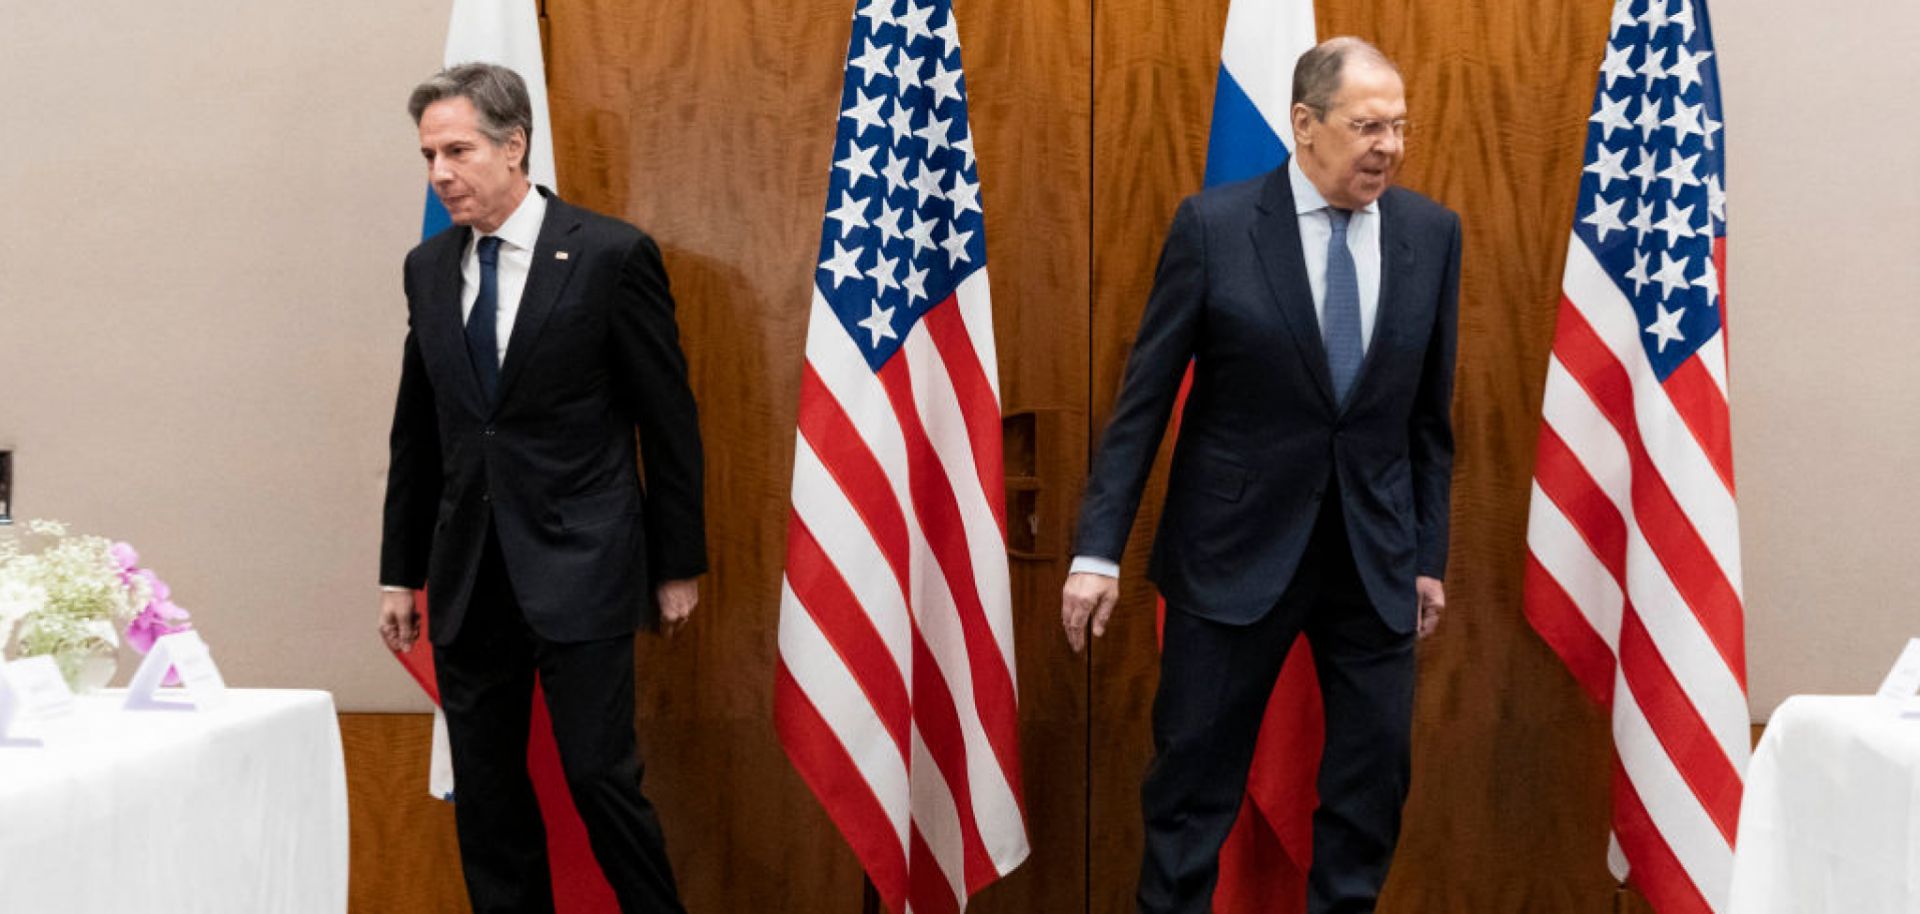 U.S . of State Antony Blinken (L) and Russian Foreign Minister Sergei Lavrov ahead of their Jan. 21 meeting in Geneva.